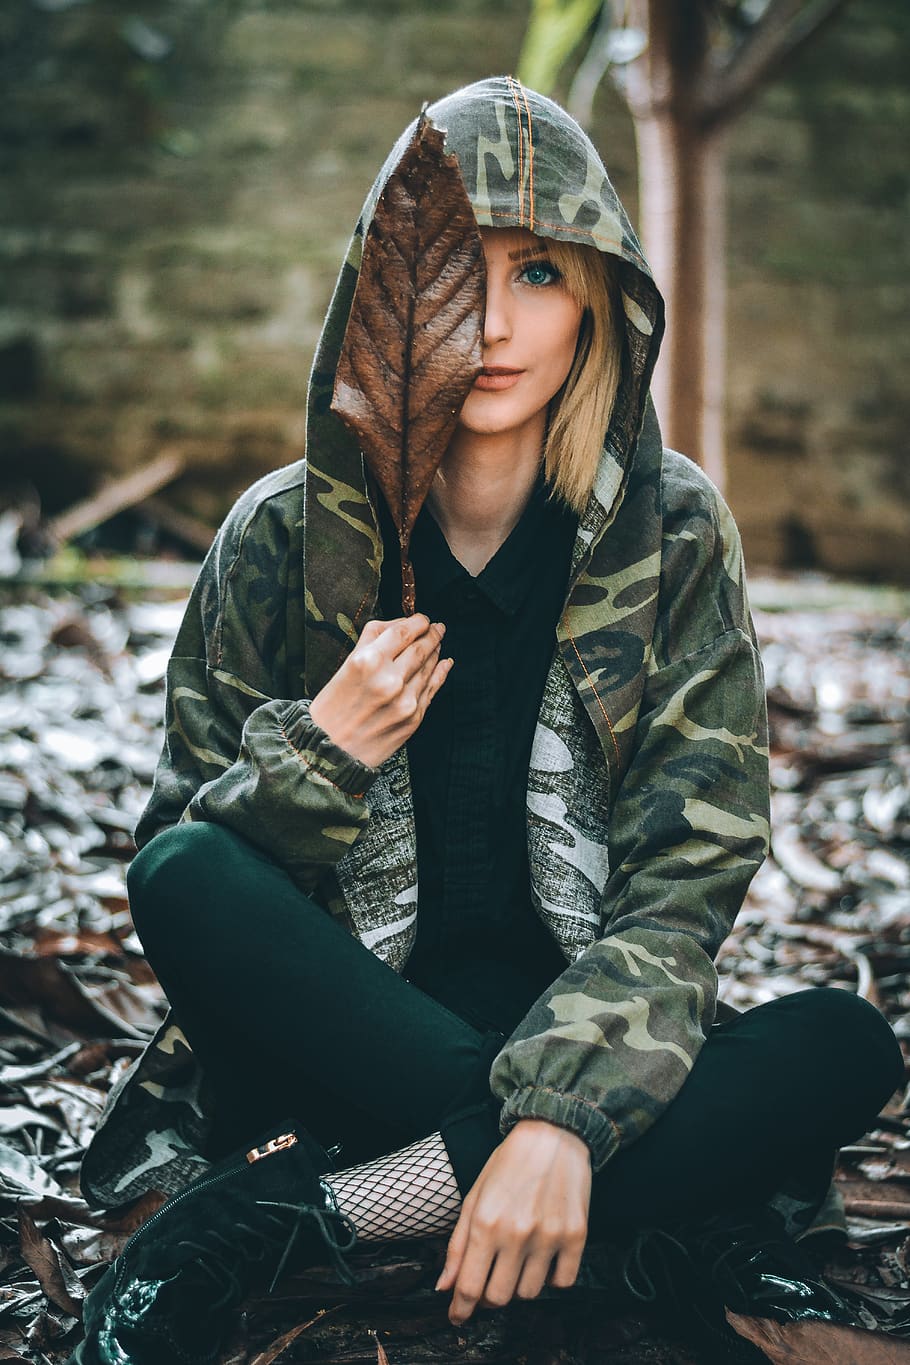 A-2 DECK JACKET / WOODLAND CAMOUFLAGE – The Real McCoy's